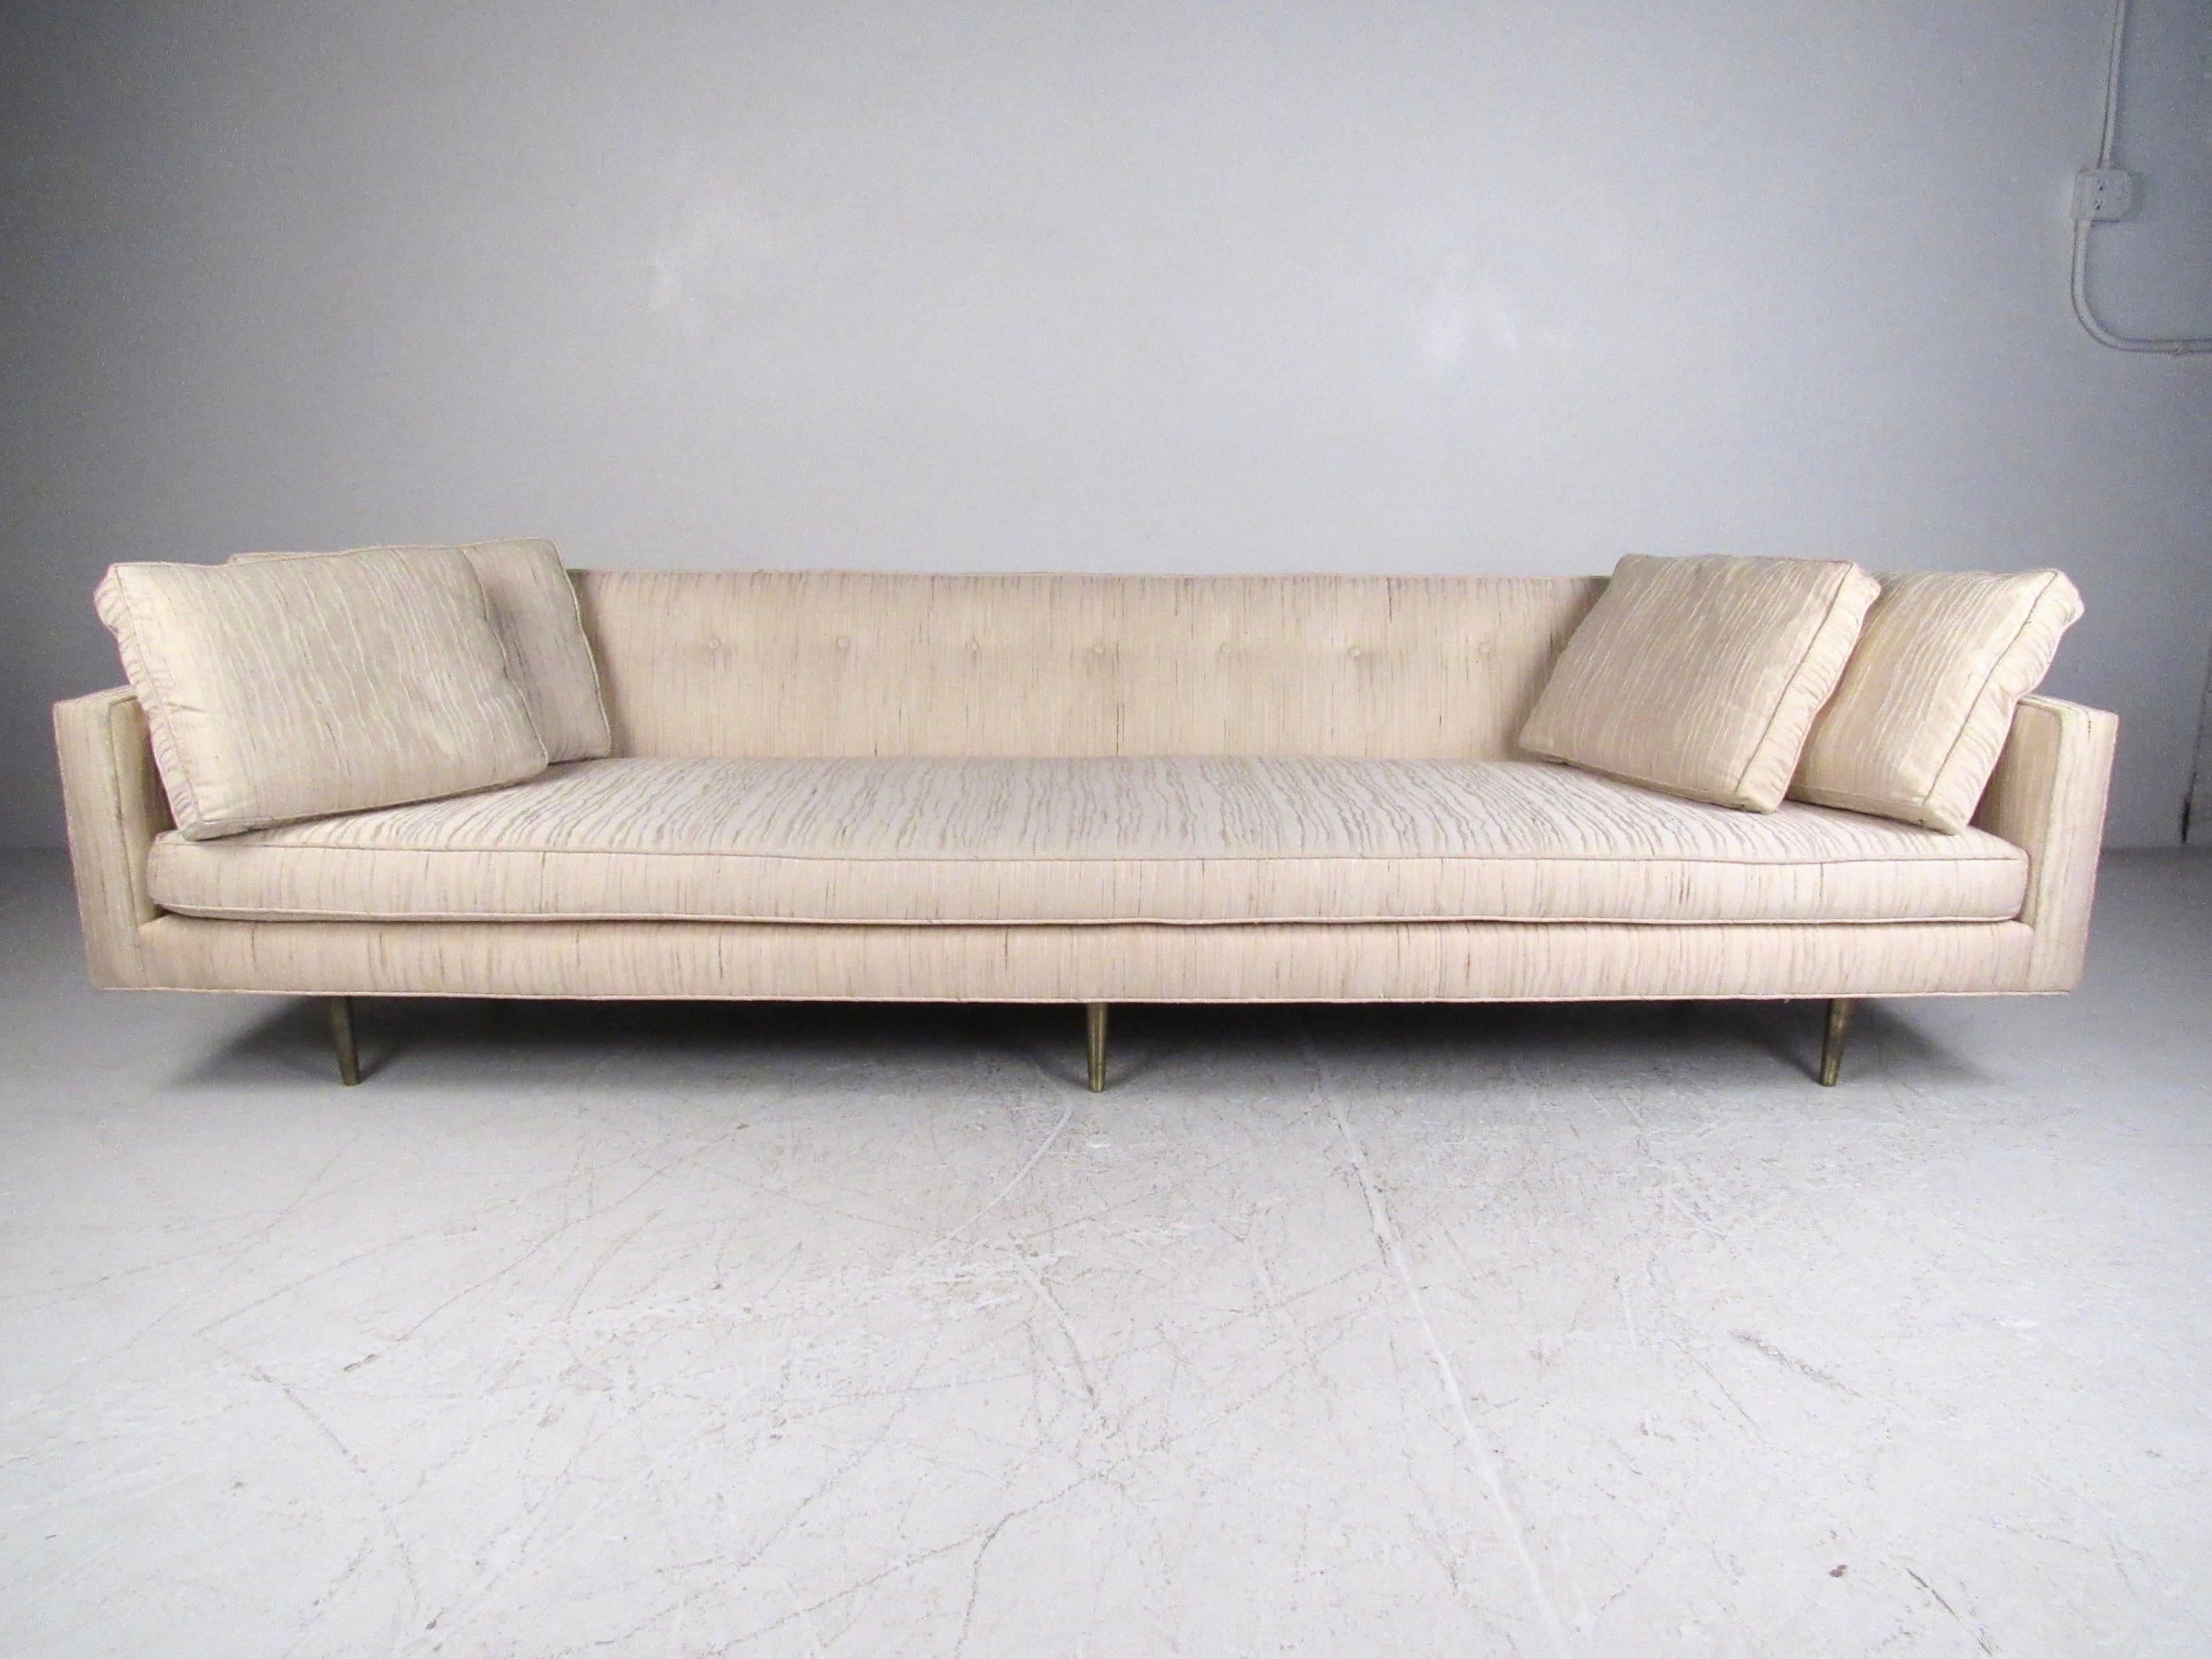 This large, stylish, Mid-Century Modern sofa by Edward Wormley for Dunbar features tufted vintage fabric, unique cutaway curved back, and tapered brass legs. Impressive in size and style, this long vintage sofa makes a beautiful addition to any